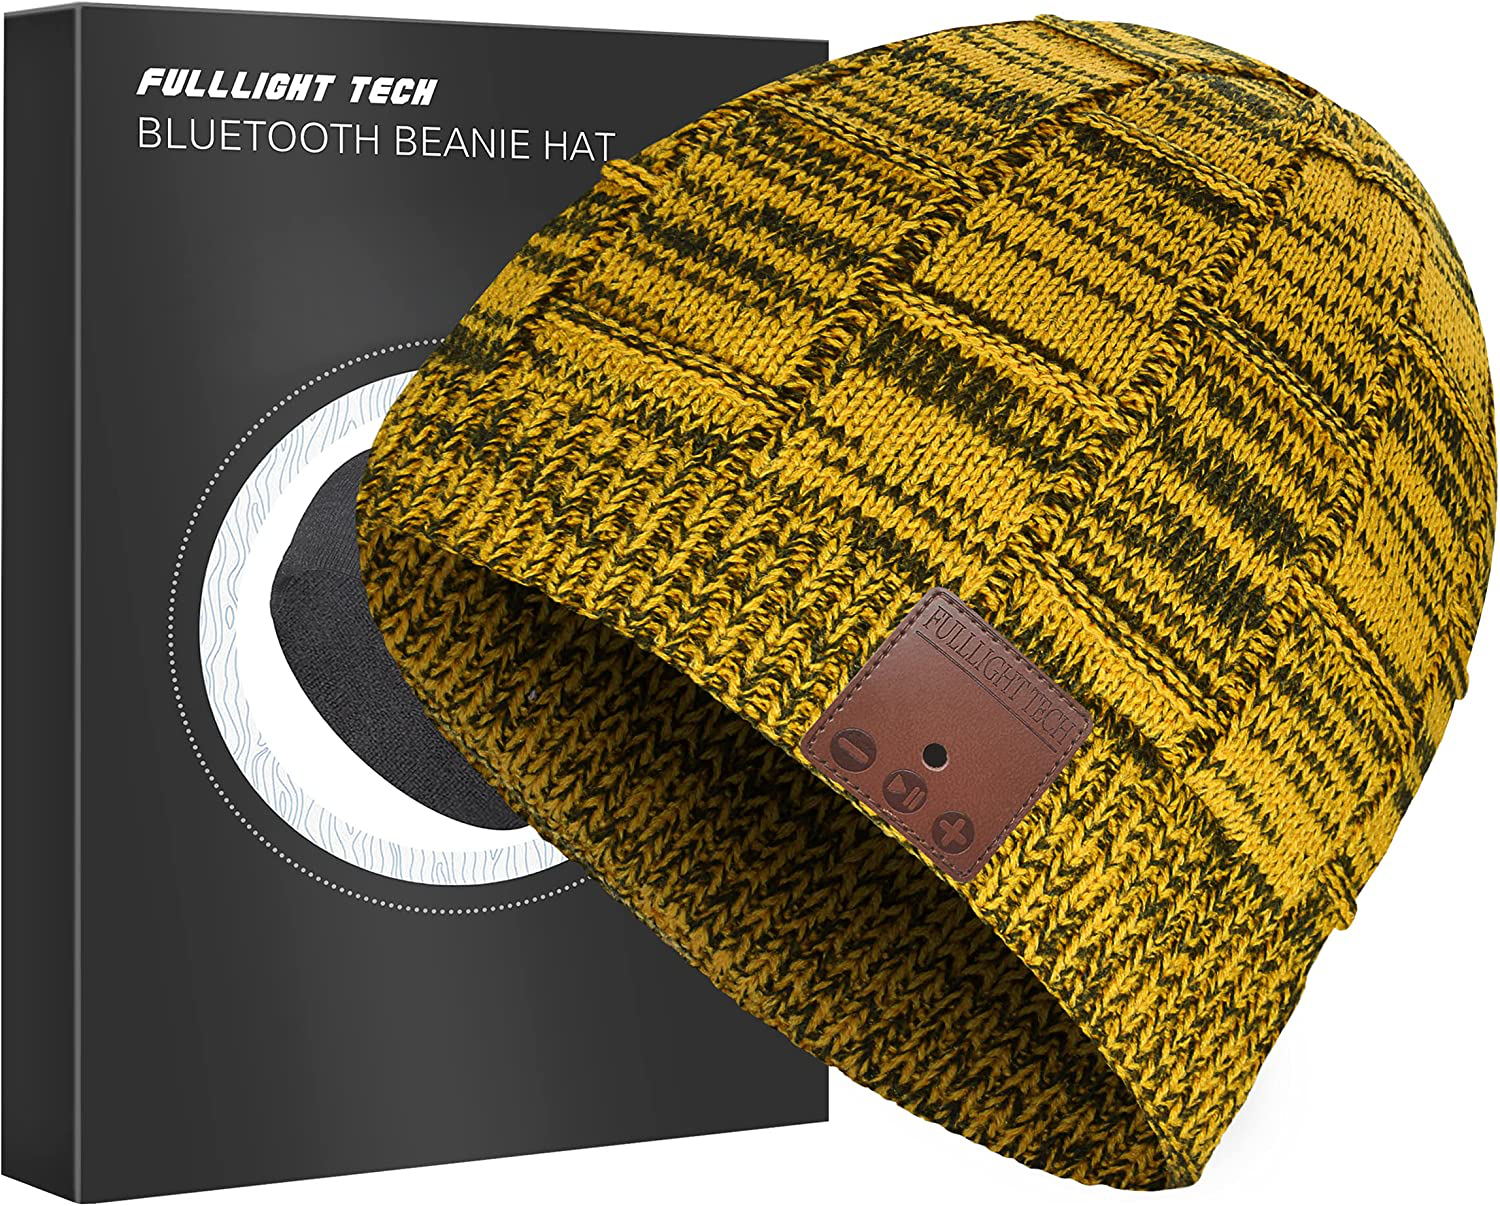 Upgraded Bluetooth Beanie Hat with Headphones Unique Tech Gifts